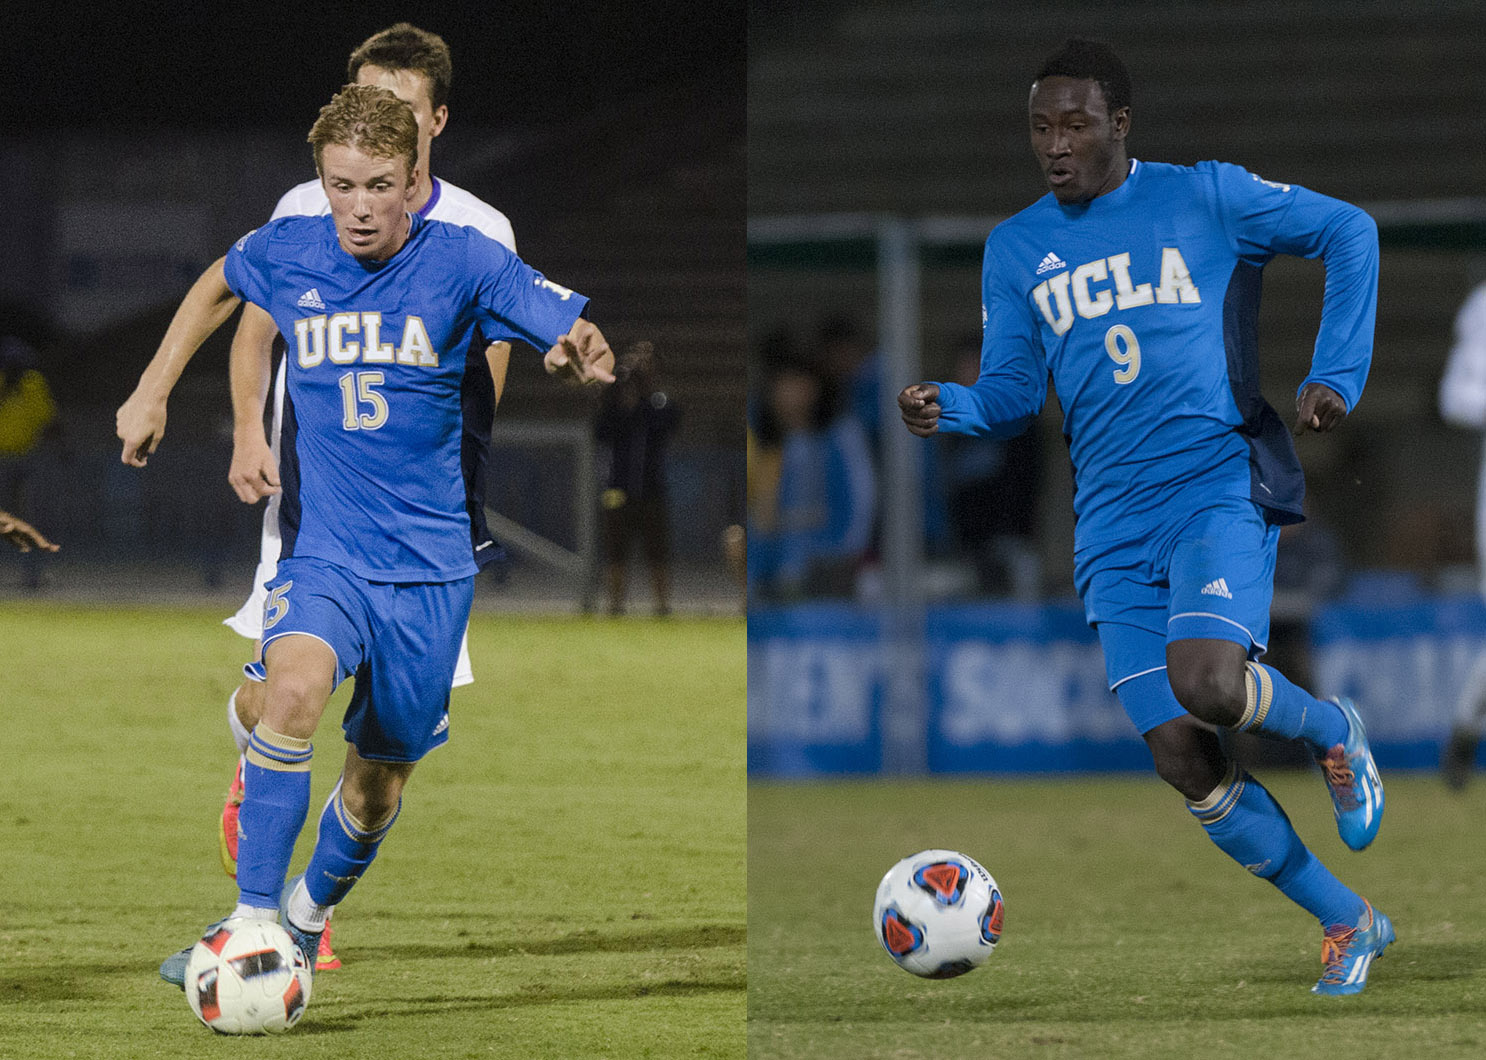 Two UCLA men's soccer players selected for Generation adidas, turn